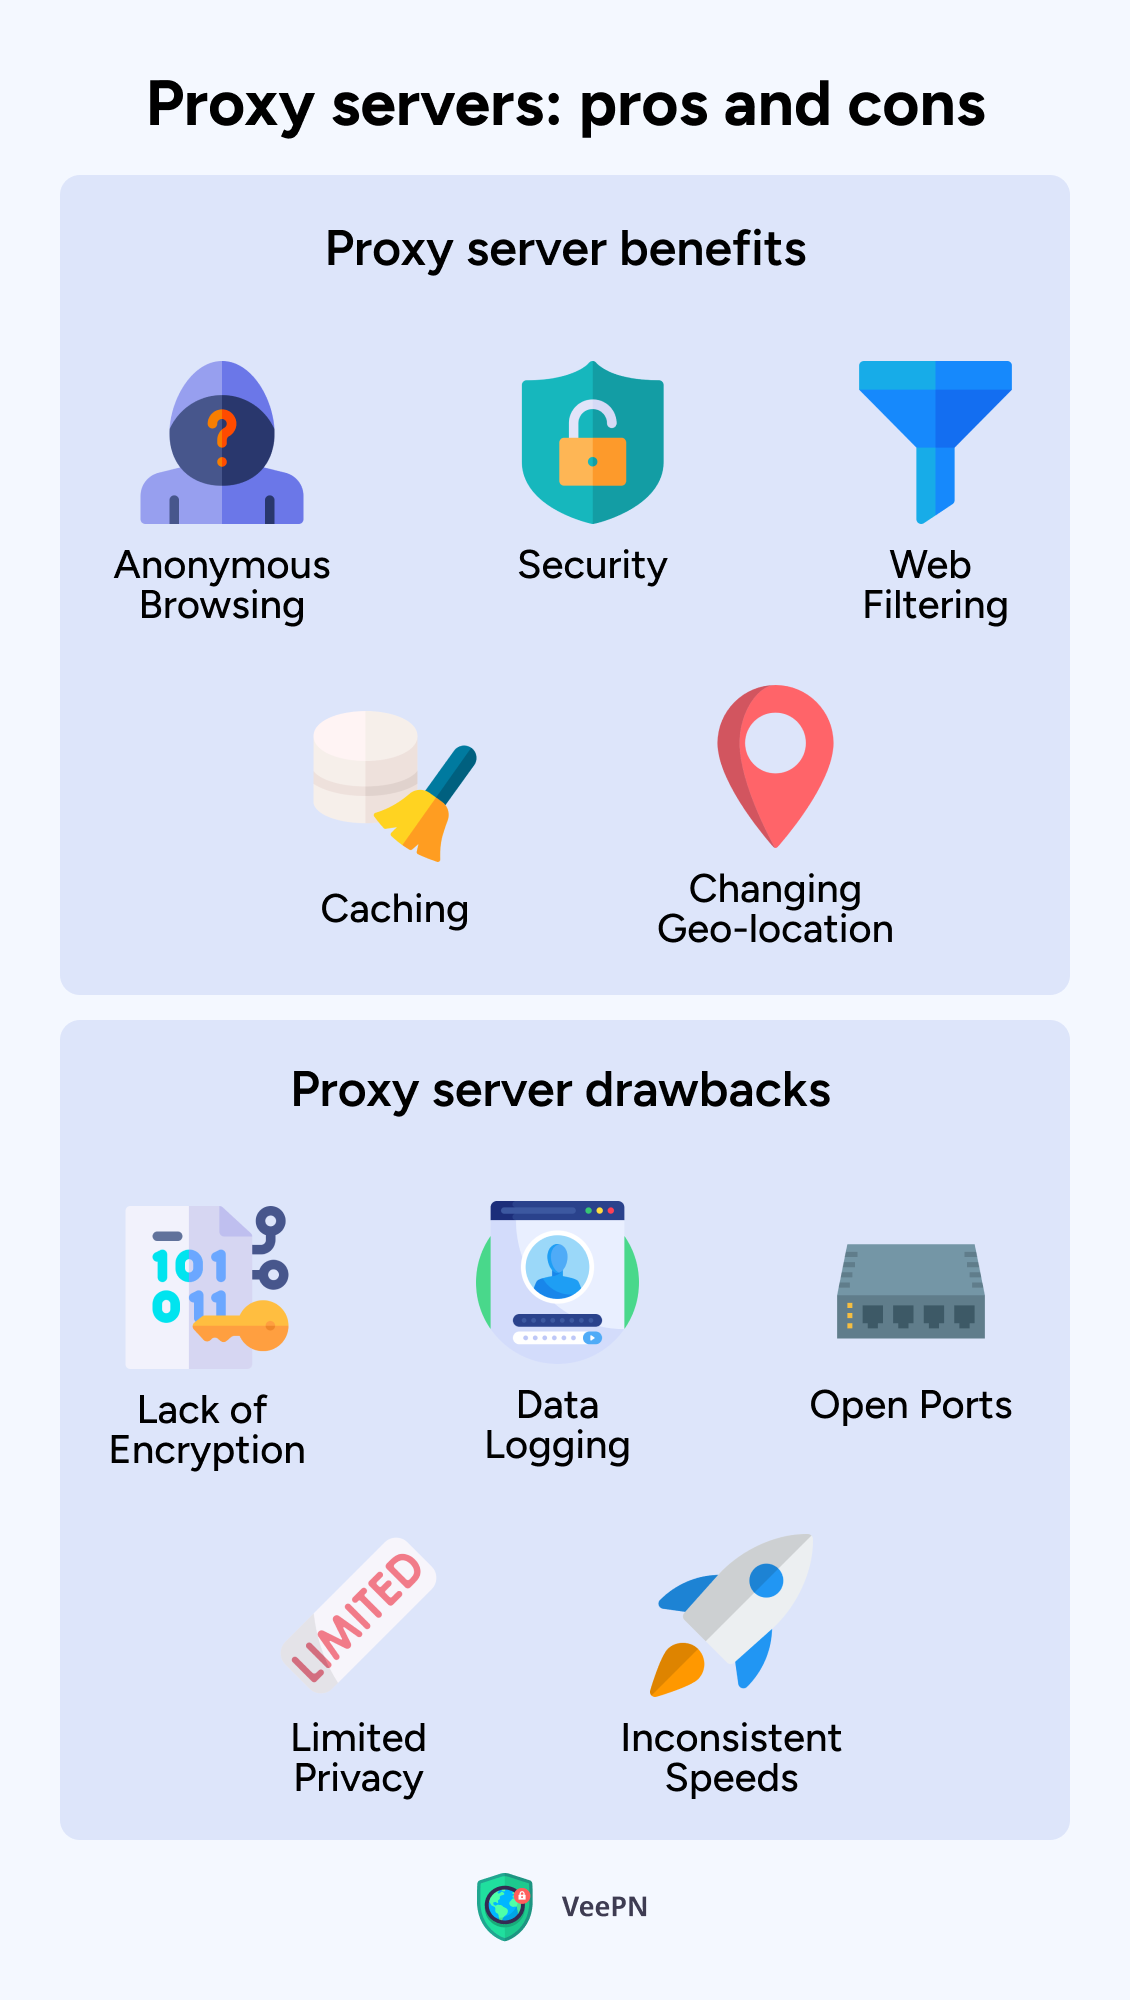 Pros and cons of proxy servers 